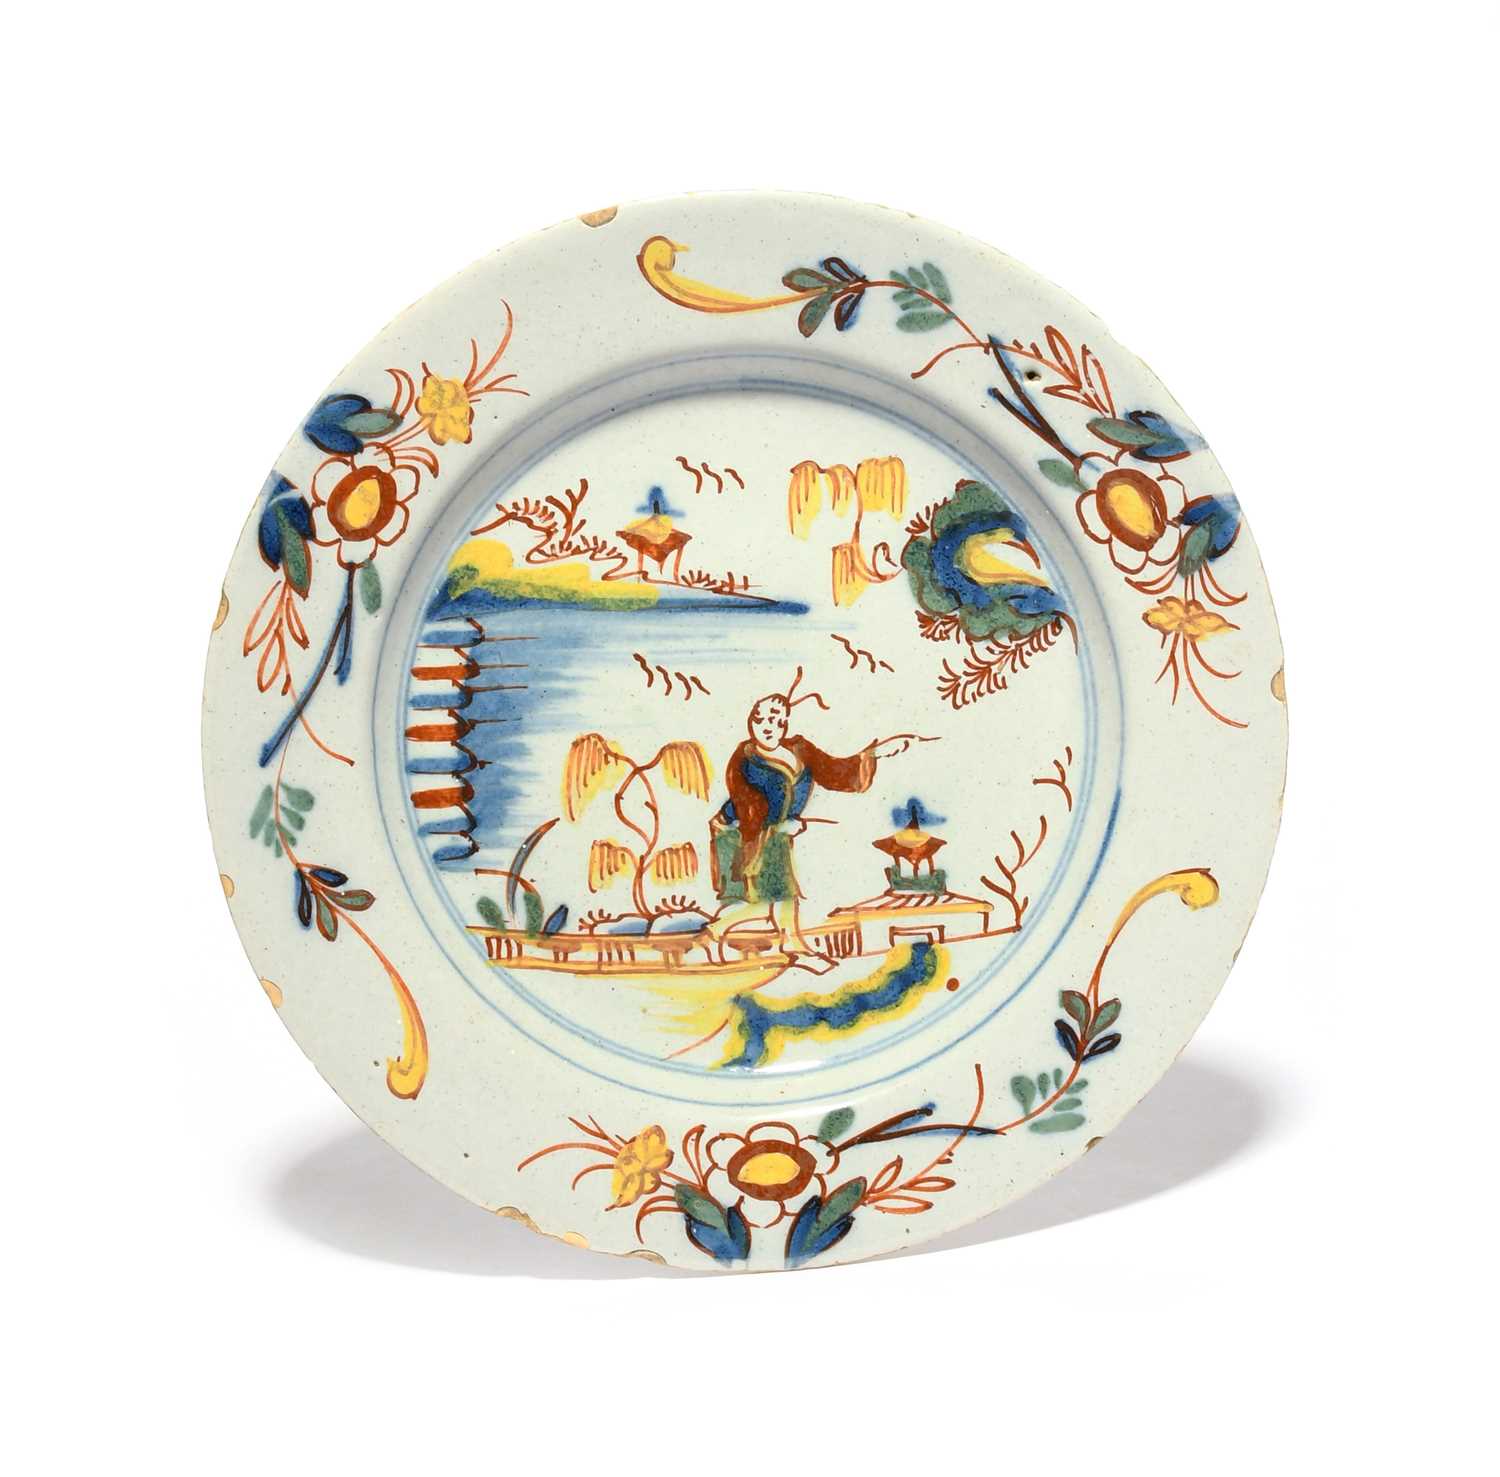 A Delft plate, c.1730, brightly painted in red, yellow, blue and green with a Chinese man crossing a